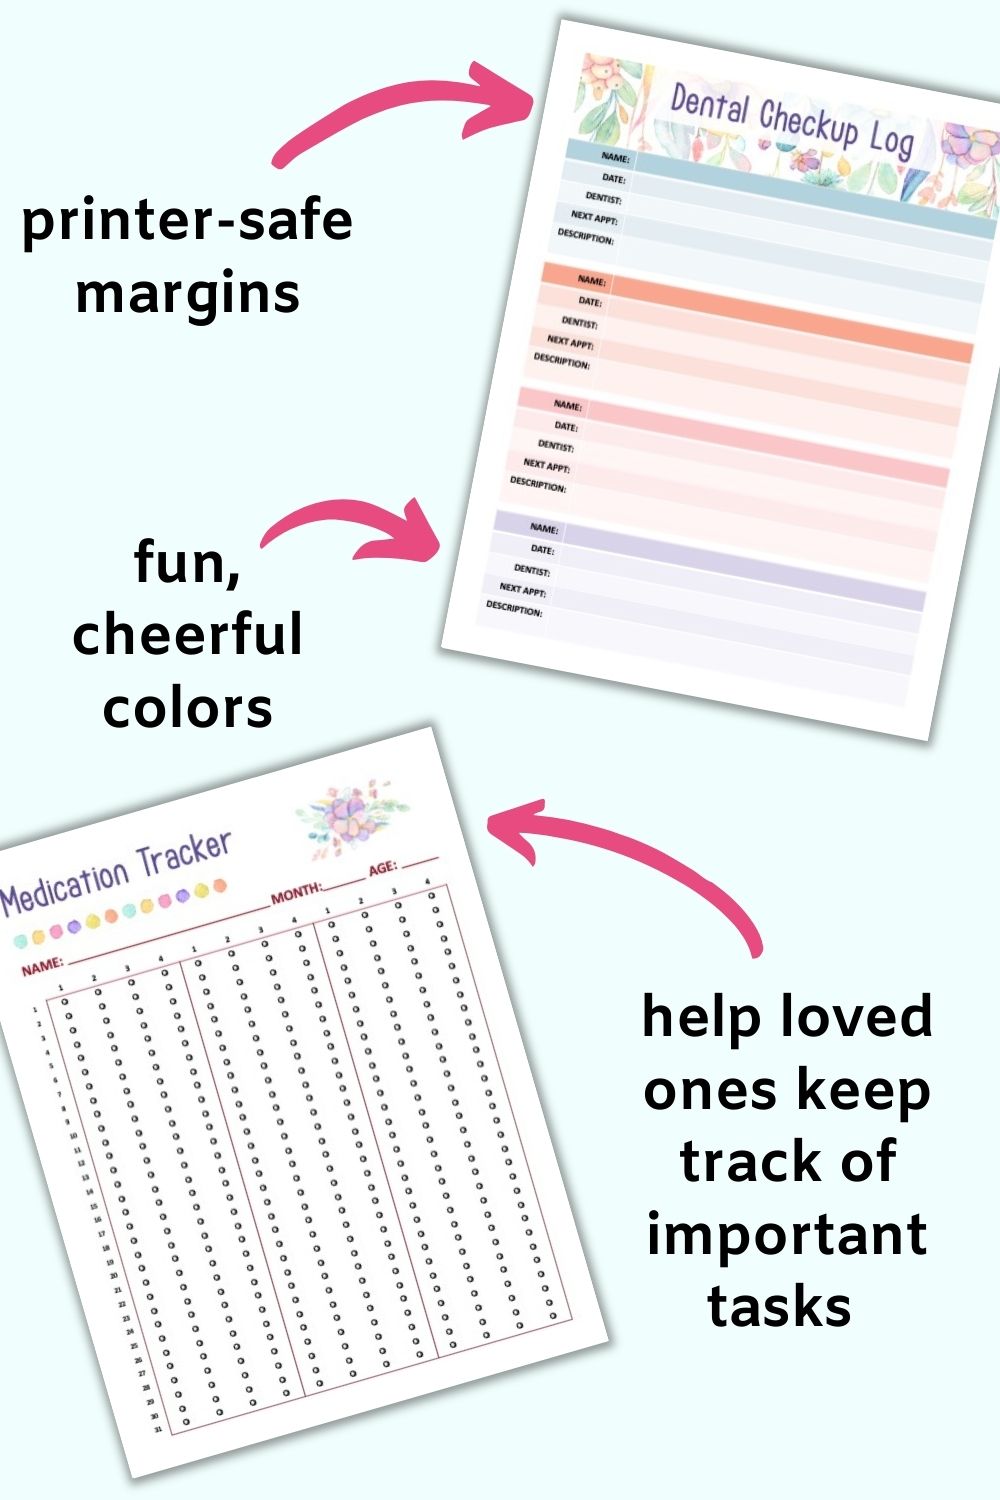 A close up of a printable dental checkup log page and a monthly medication tracker